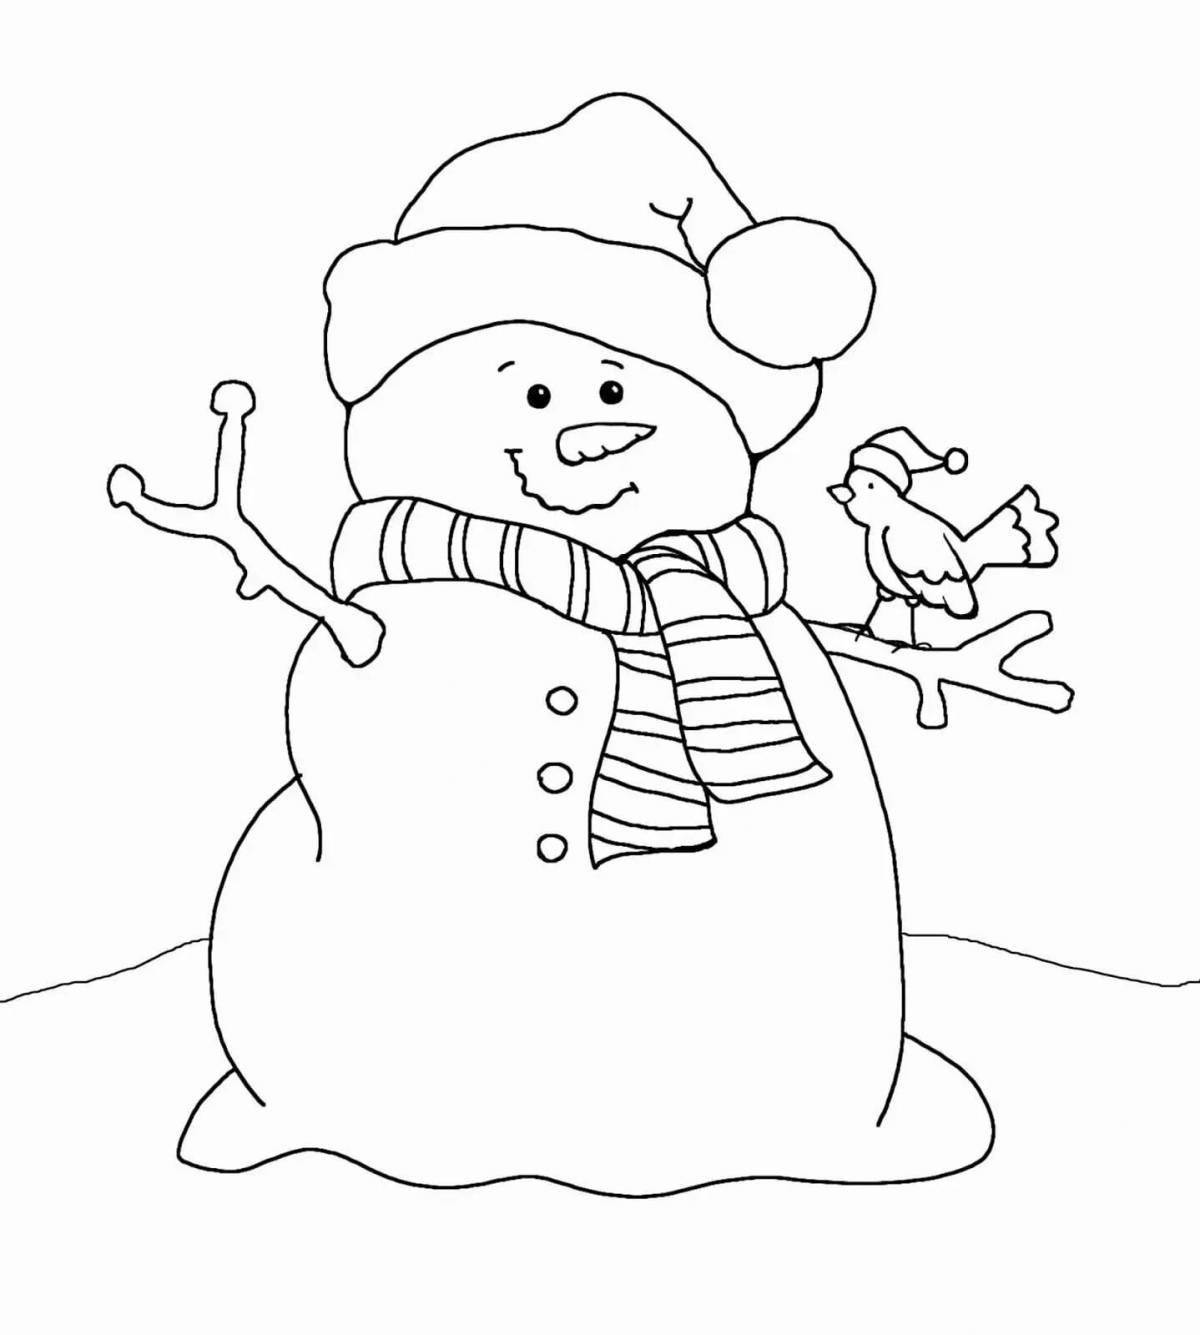 Adorable funny snowman coloring book for kids